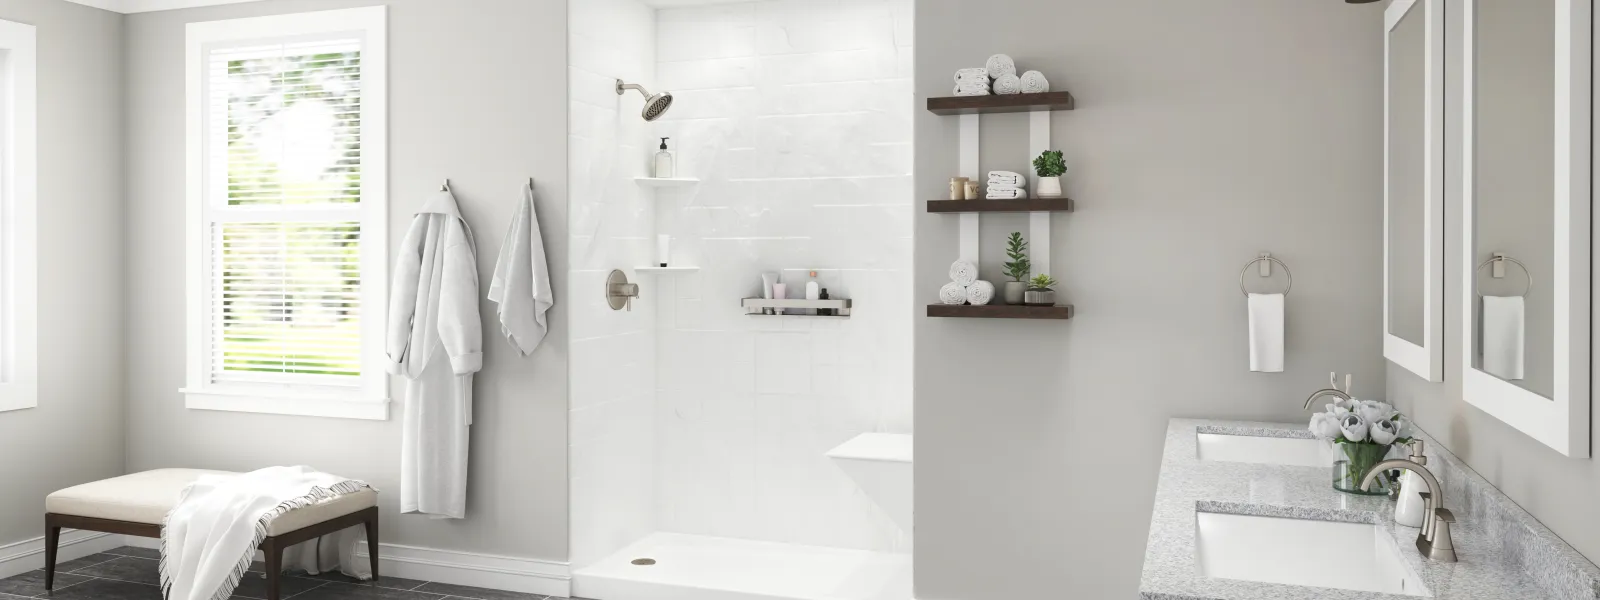 How to Make the Most of Your Bathroom With a New Shower